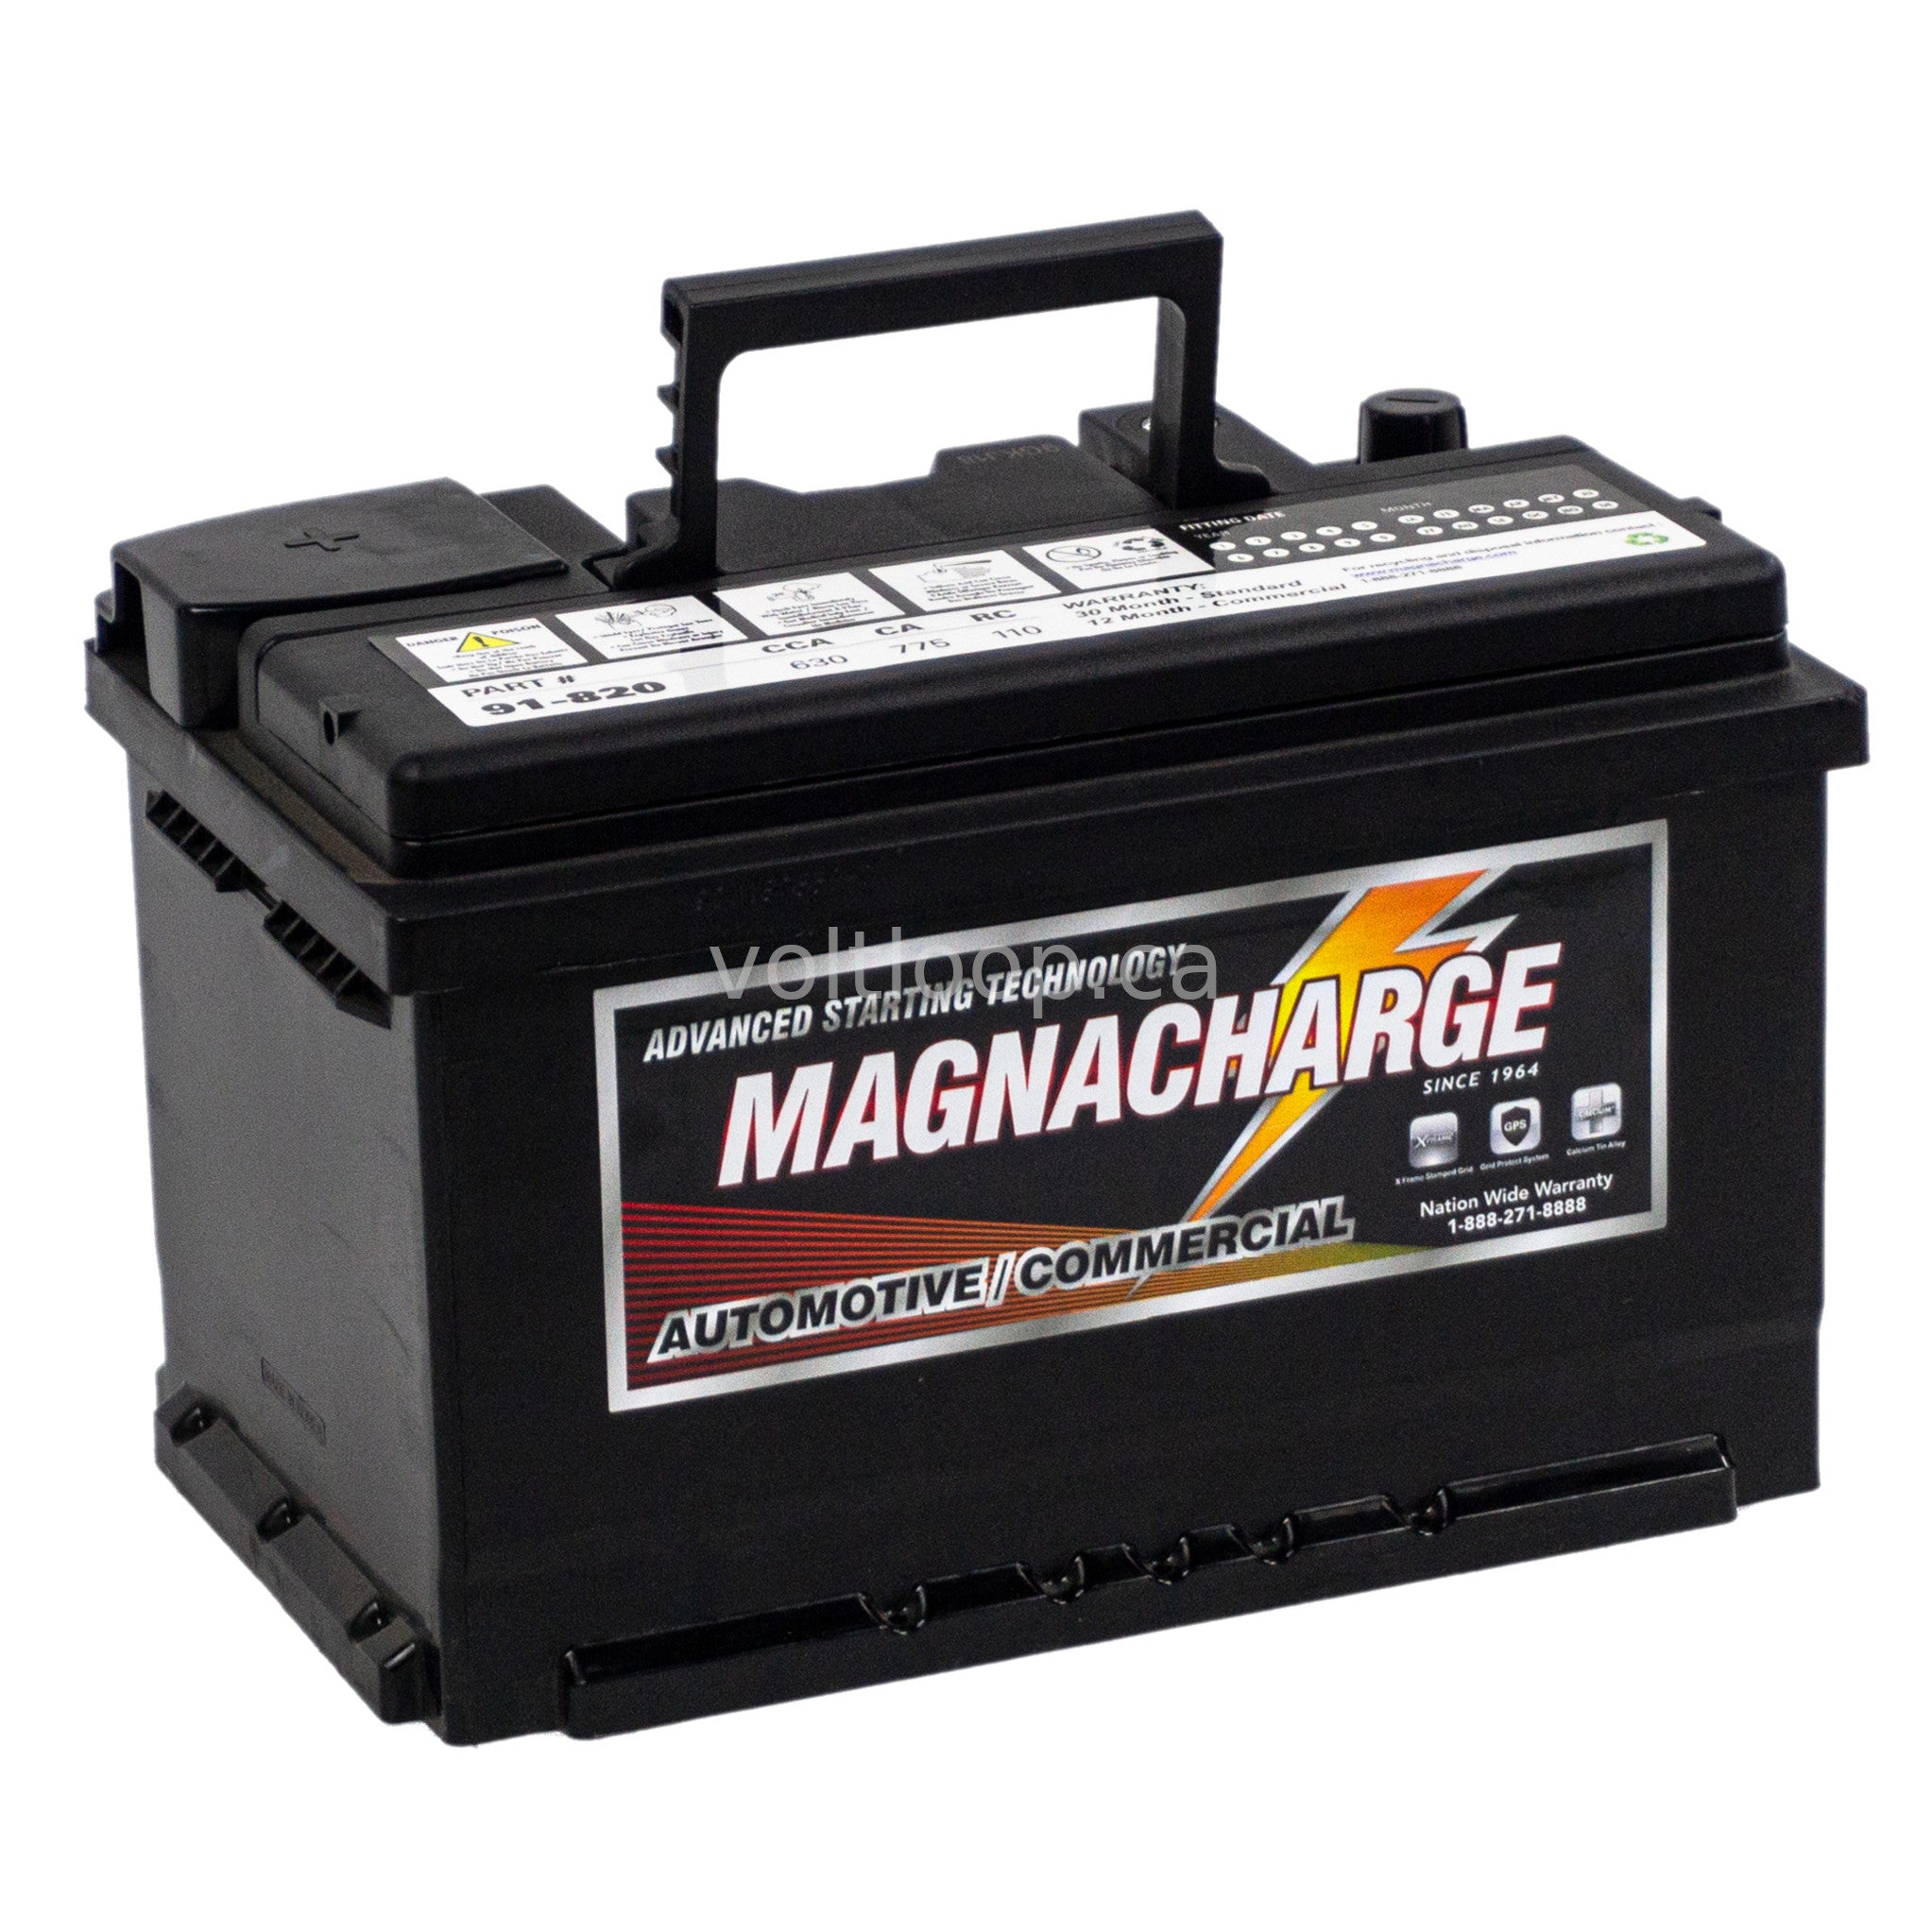 Magnacharge 91-820 Group 91 Car Battery